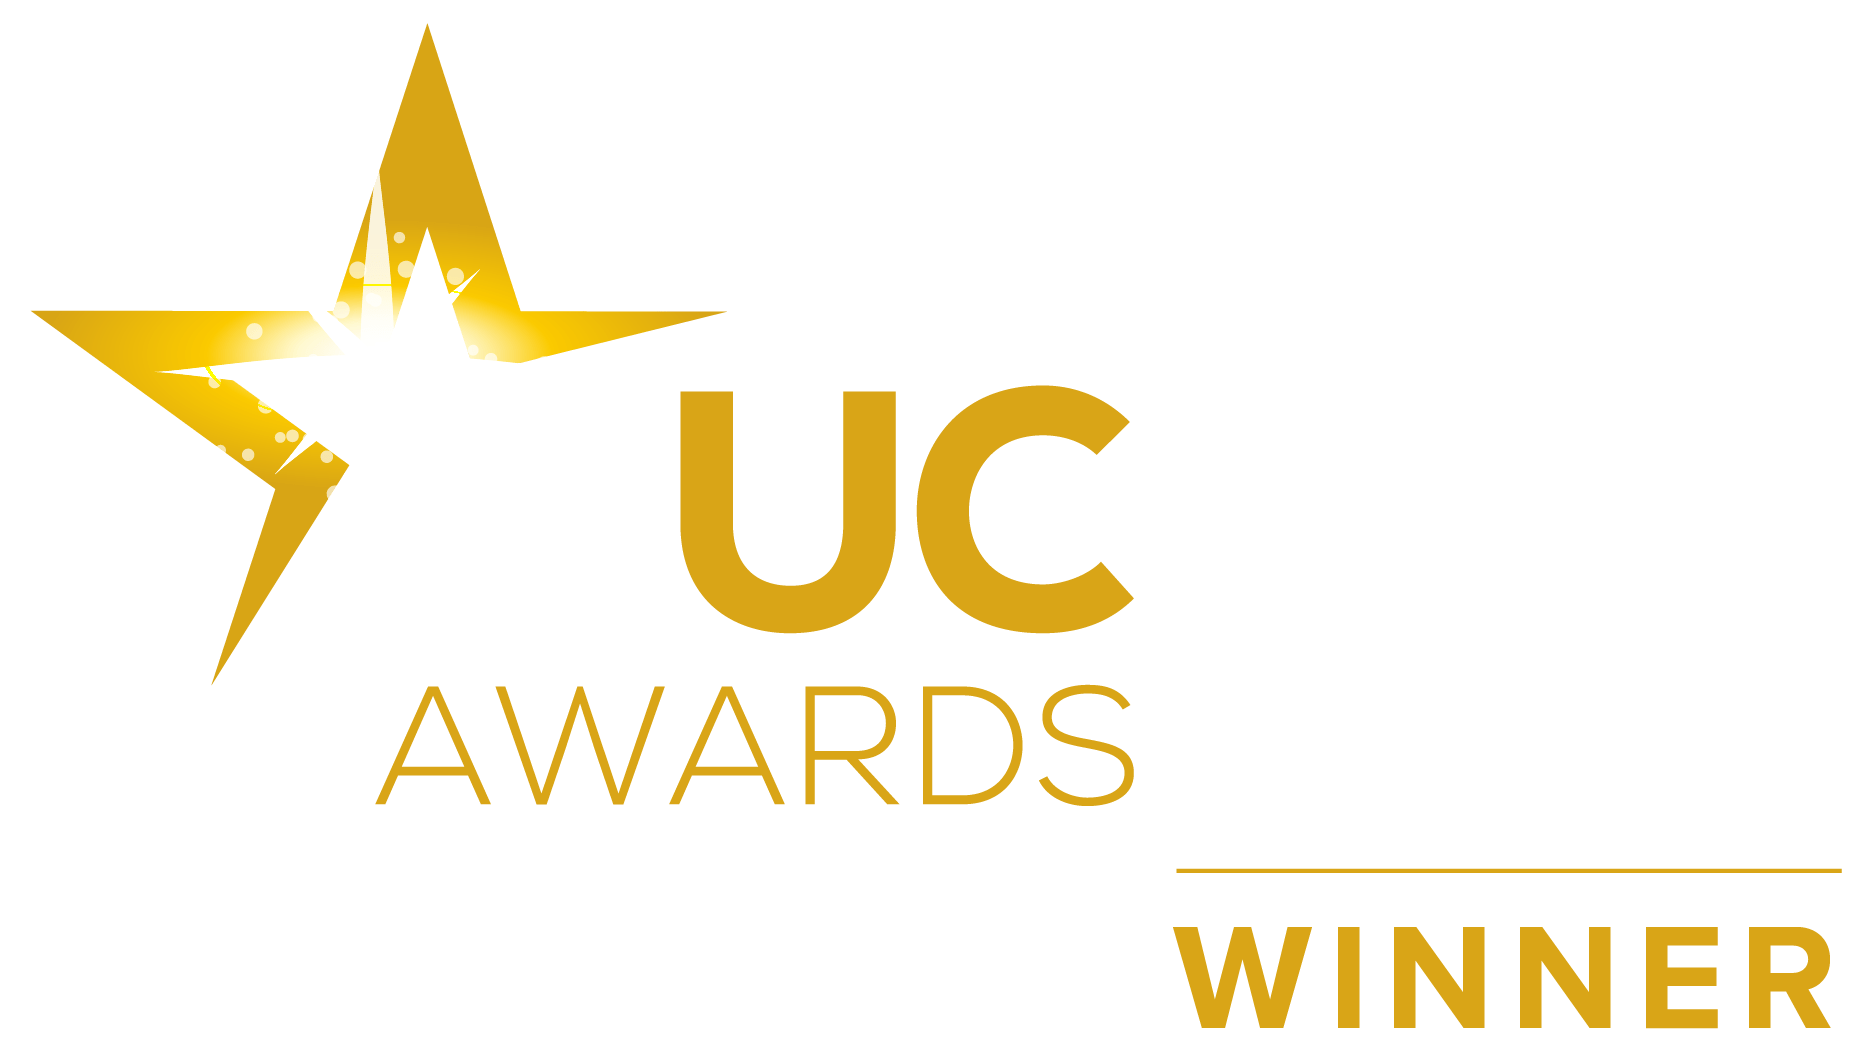 Exponential-e: Best Cloud Communications Provider at the 2020 UC Awards